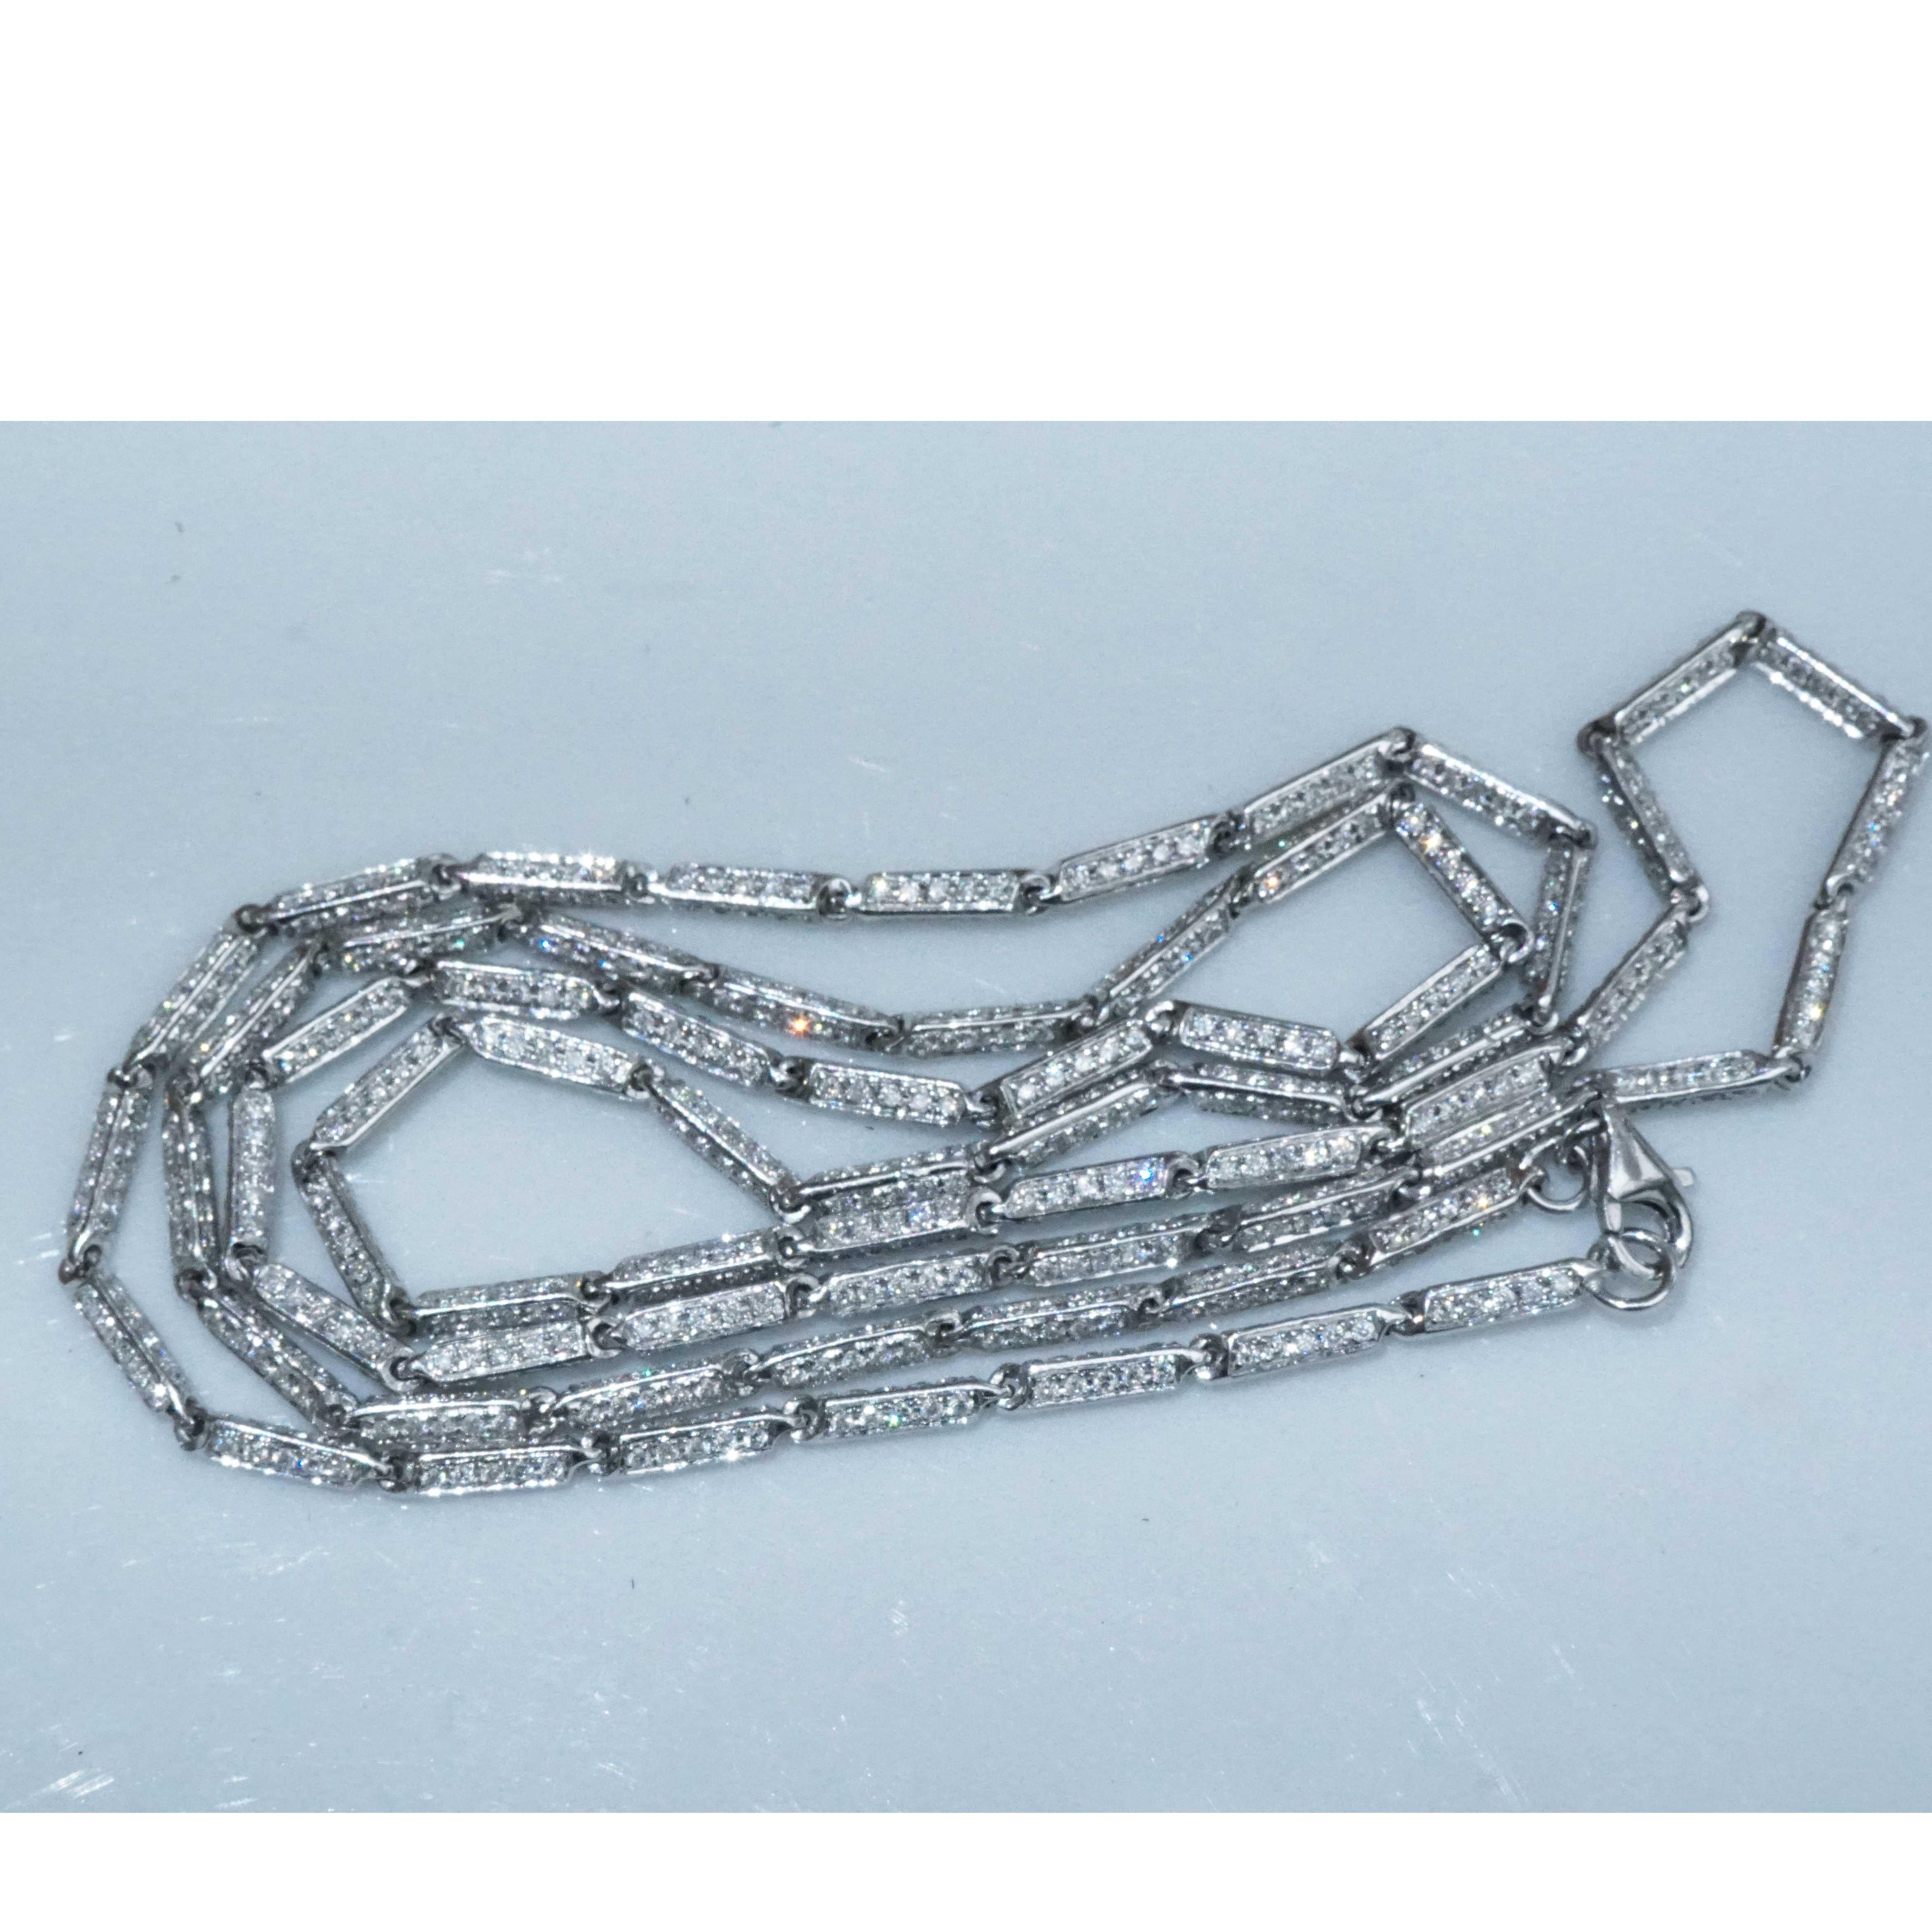 Brilliant Necklace 6.65 carat 1050 Diamonds OPERA Length 27 inch fully movable For Sale 7